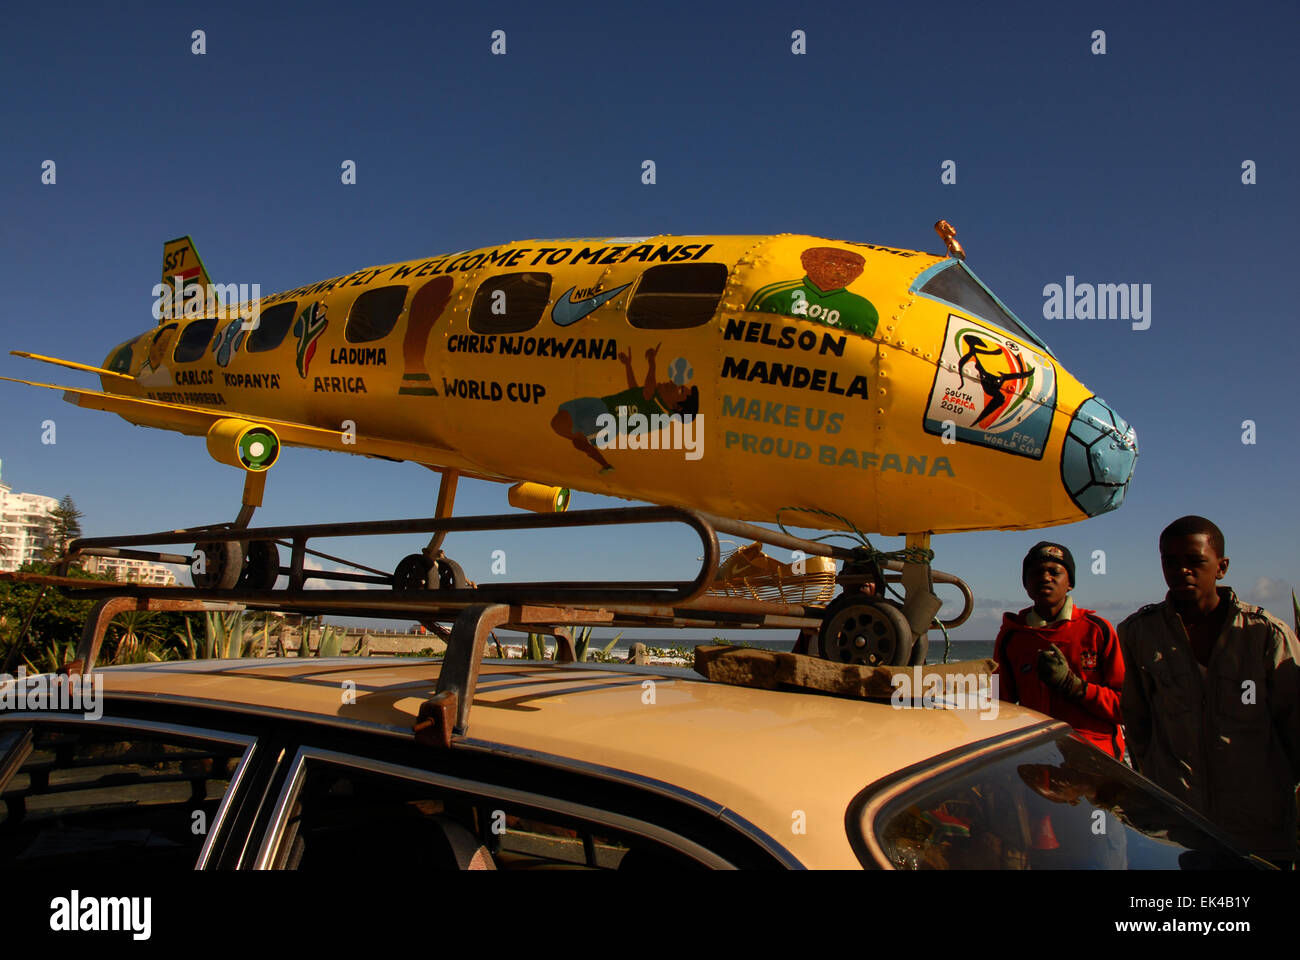 Two young men stand next to their car with a home made areoplane on the car to celebrebrate the 2010 FIFA World Cup in South Africa, Sea Point, Cape Town 09.06.2010. The aeroplane is made by Mboneli Lefty Booi and Siseko Christopher Kameso, both from Khayelitsha, a township in Cape Town.The plane is handmade and designed by them. It has been hand painted with a picture of Mandela, zakumi ( the south African world cup mascot), Zuma, Bafana Bafana etc It has all the flags painted on it of the countries taking part. They also made the boot. Their wish was,  “ we would like support from government Stock Photo